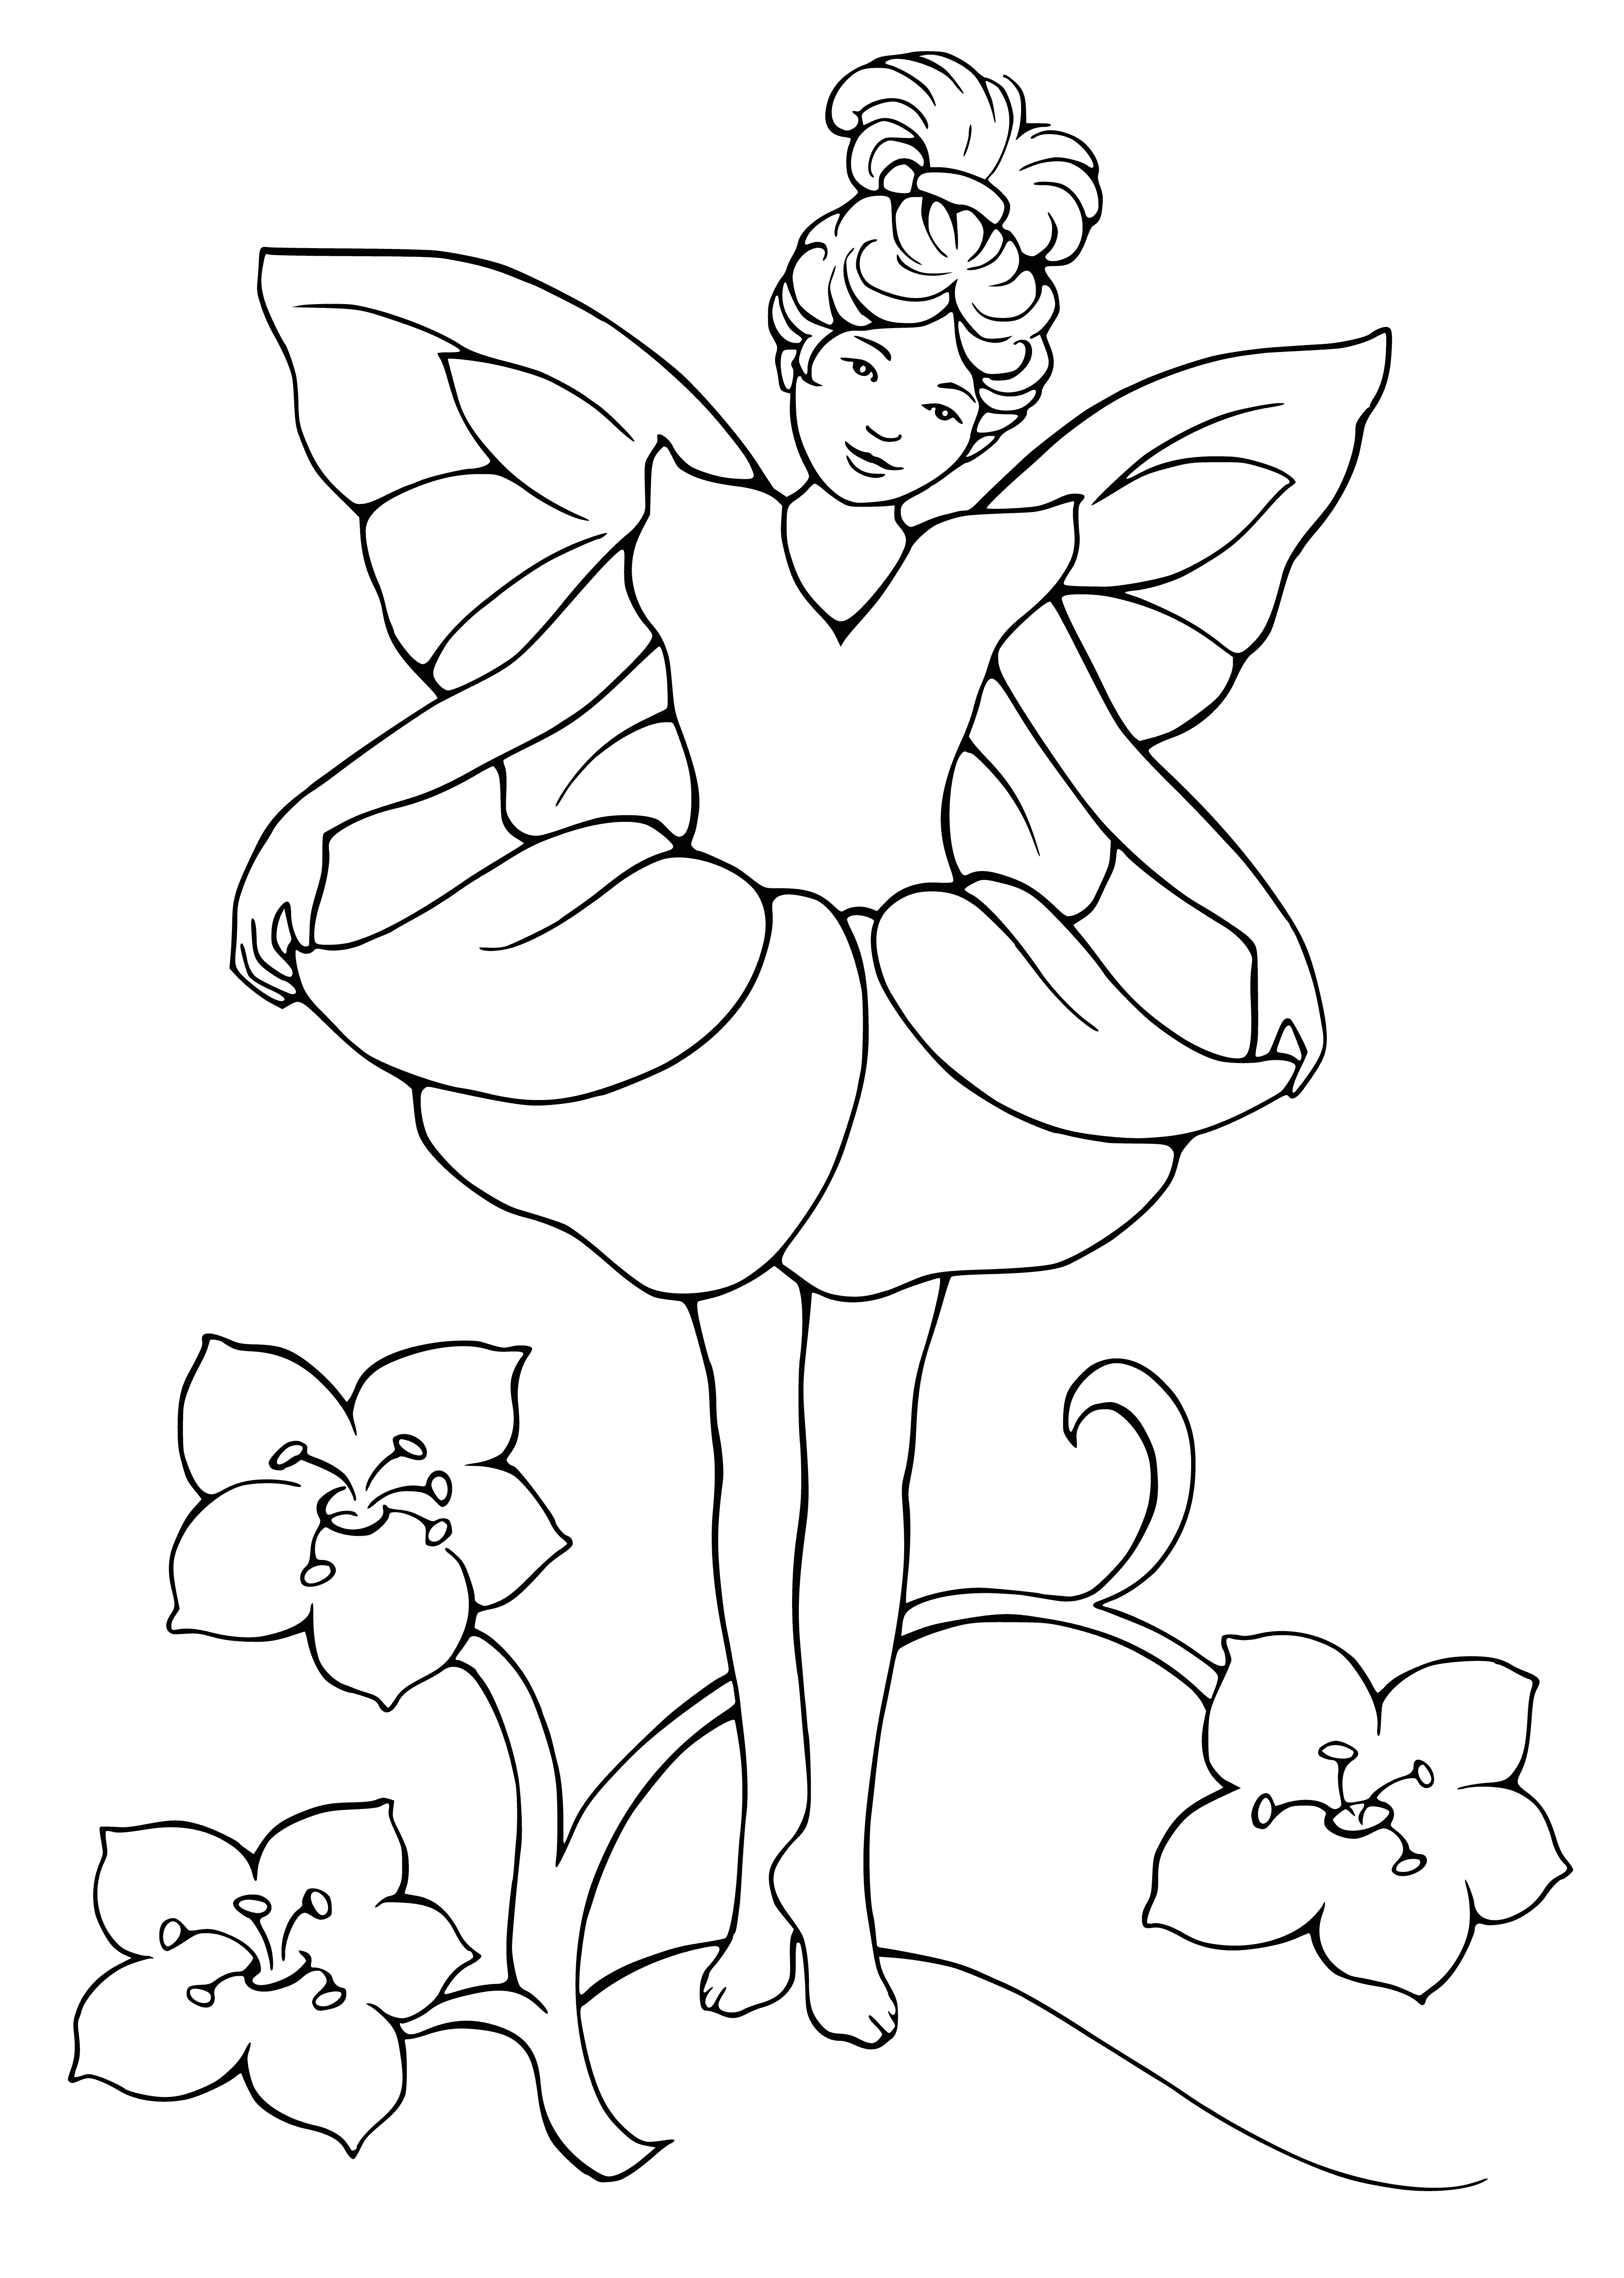 Fairy of flowers coloring page